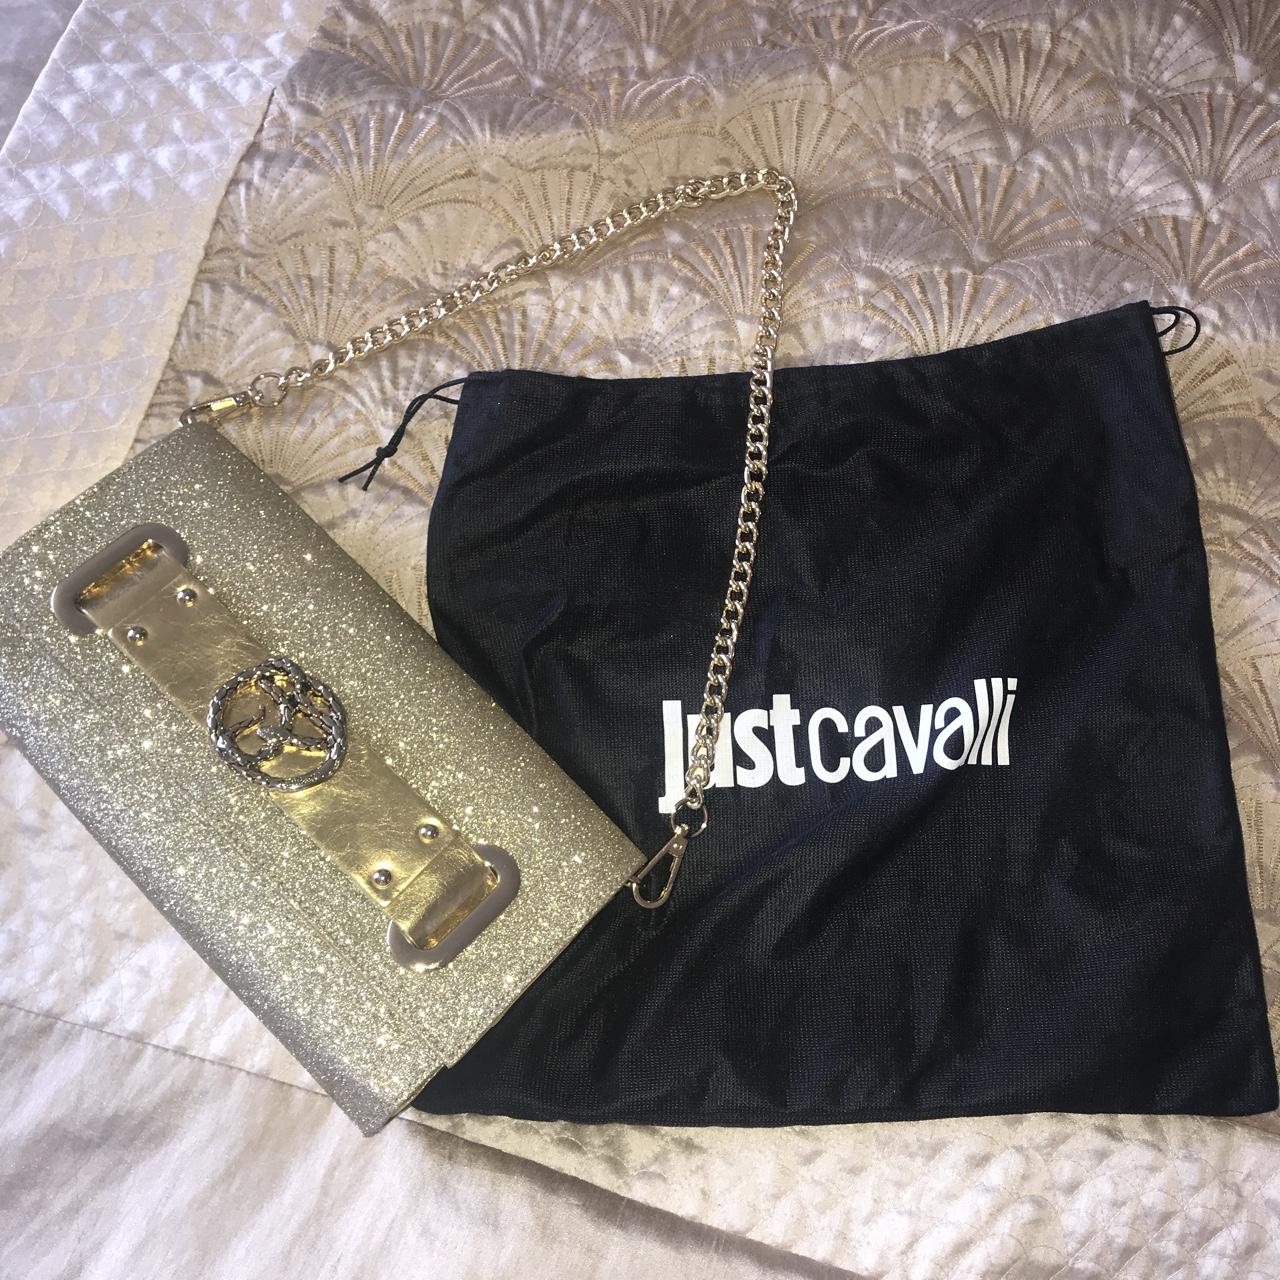 JUST CAVALLI COMBINATION LEATHER AND FABRIC ANIMAL PRINT SHOULDER BAG | eBay